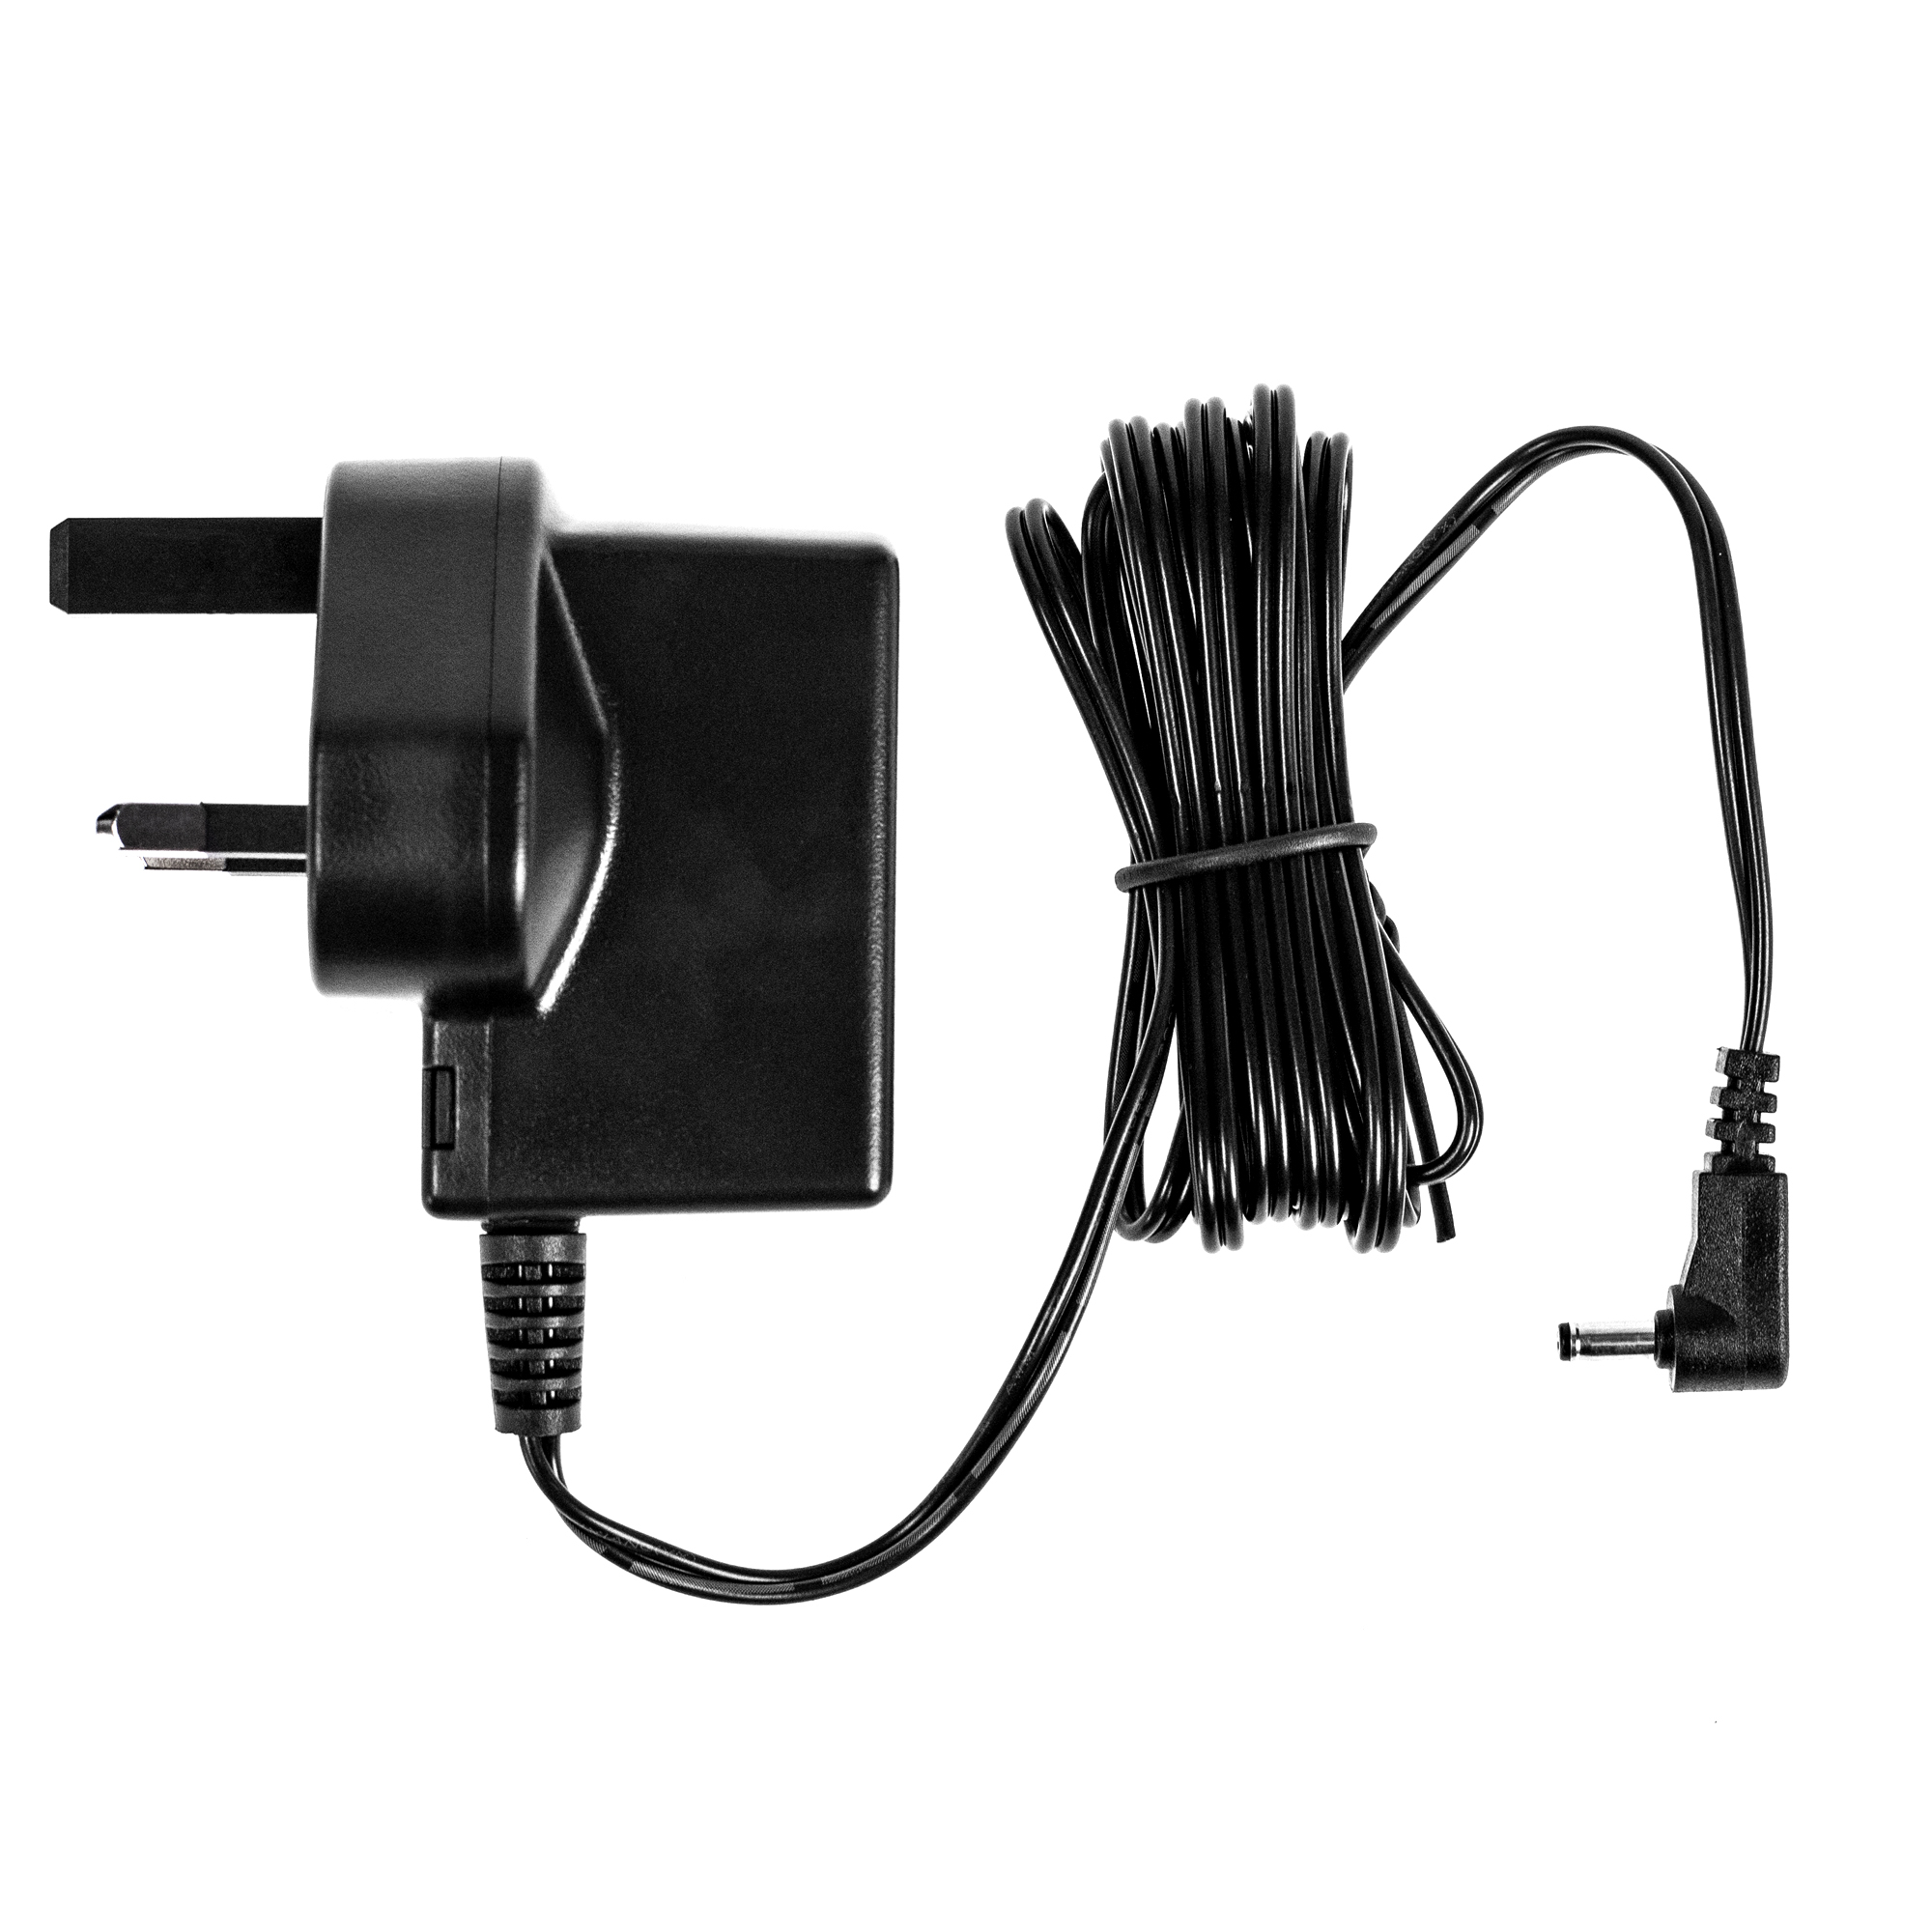 2M USB 5V 2A Black Charger Power Cable Adaptor for Wahl 9854L Grooming  Trimmer